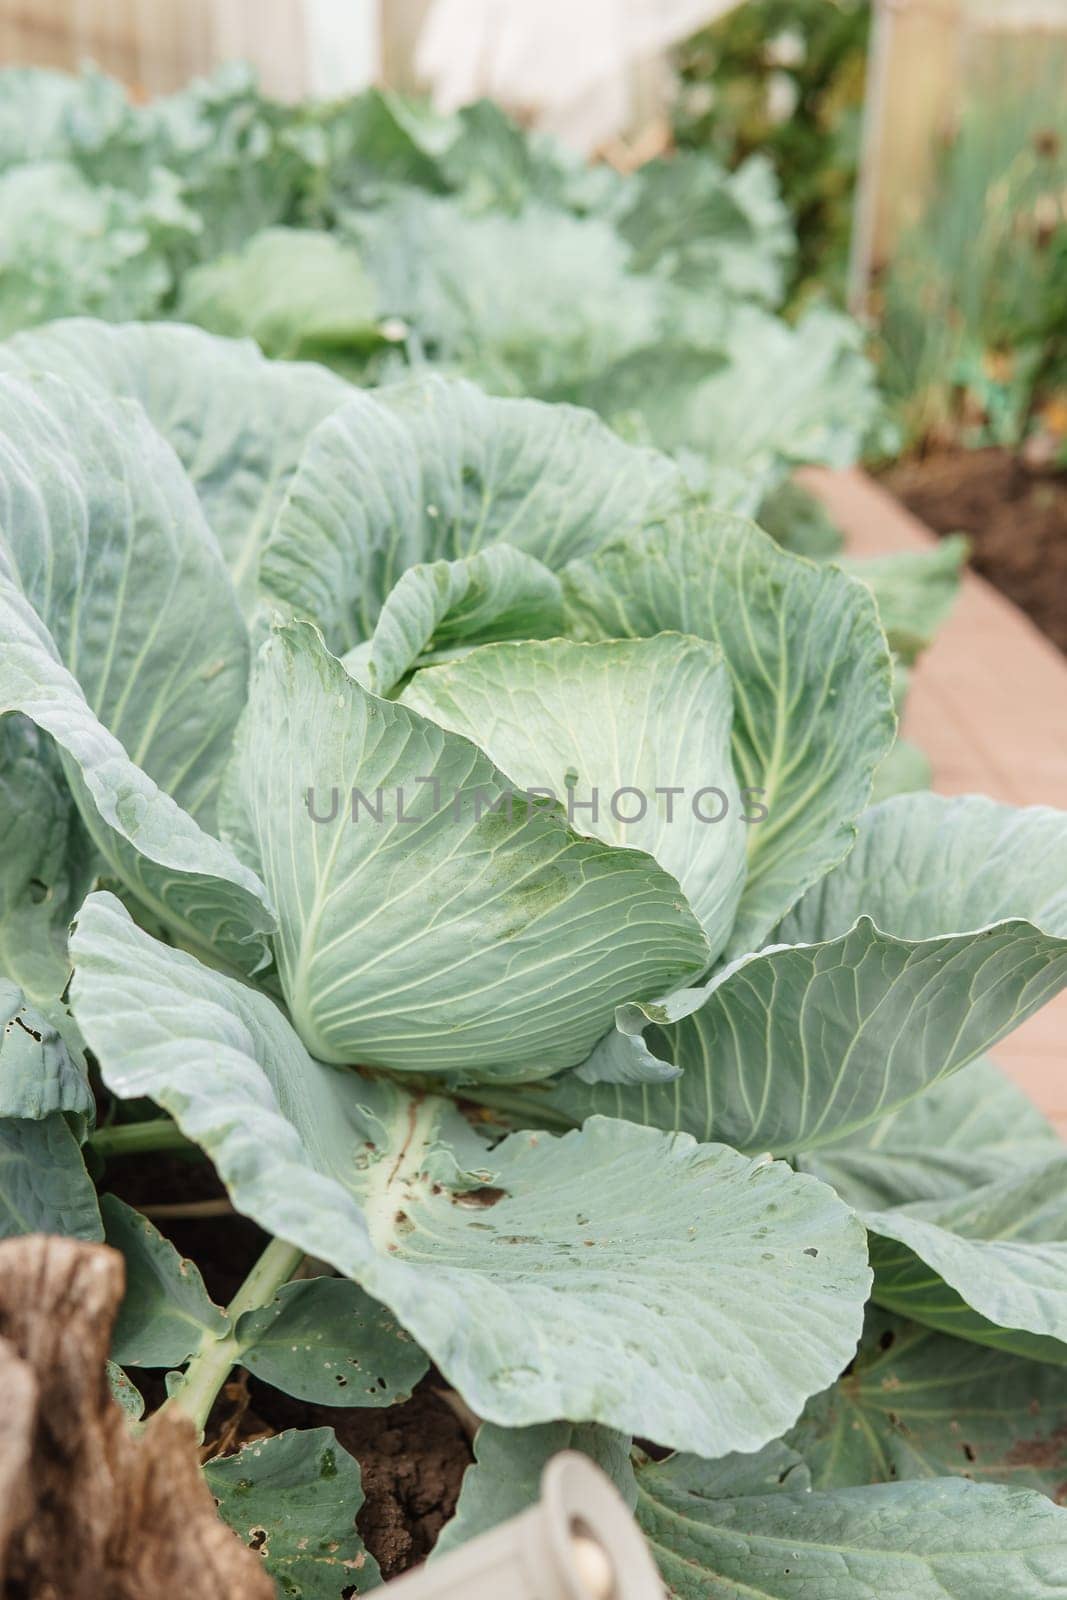 Cabbage grows in the garden. Harvesting cabbage. Life in the village. by Annu1tochka